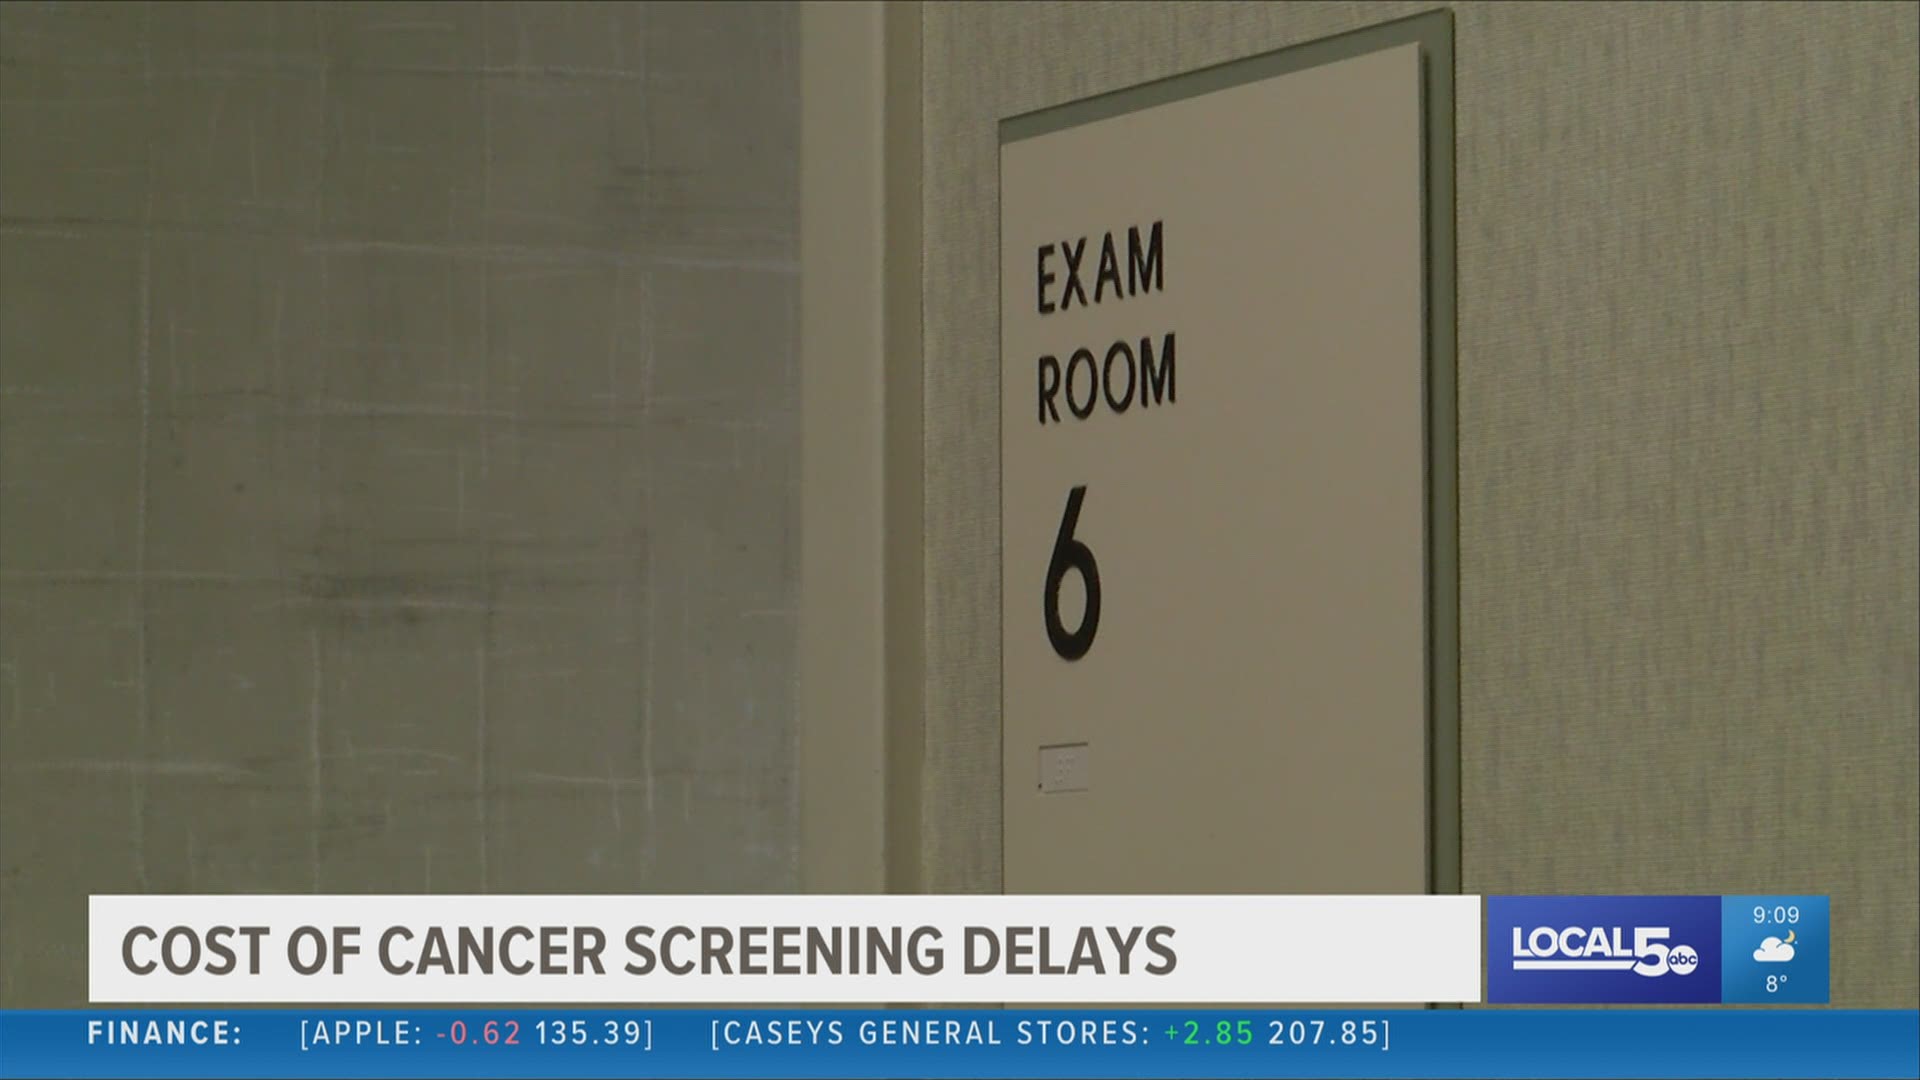 Putting off screenings will lead to thousands of additional cancer deaths in the next decade, according Dr. Deming with MercyOne Cancer Center in Des Moines.